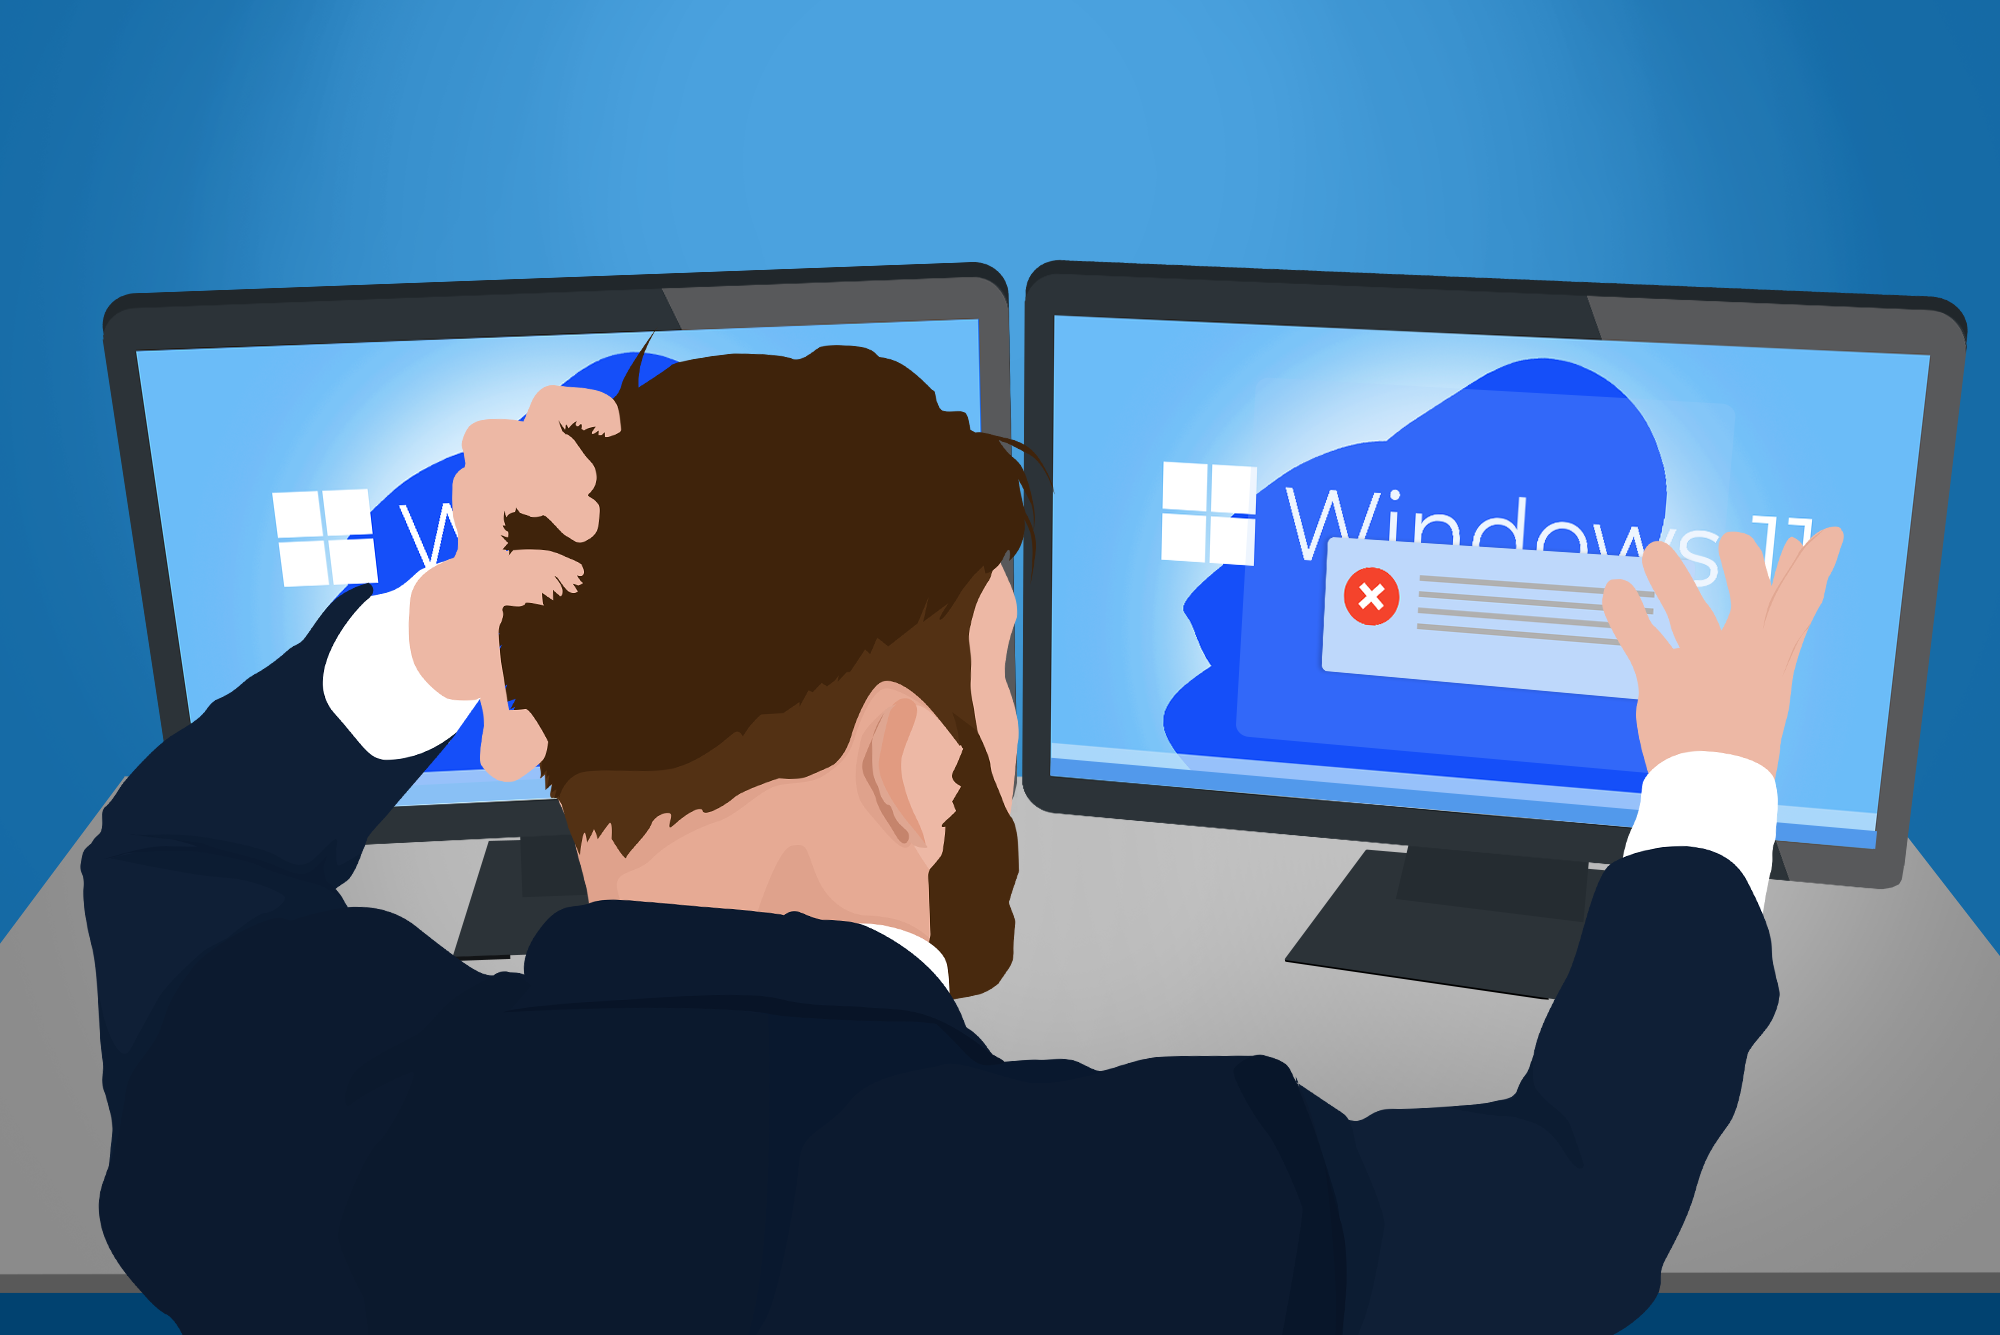 Why You Might Wait to Upgrade to Windows 11